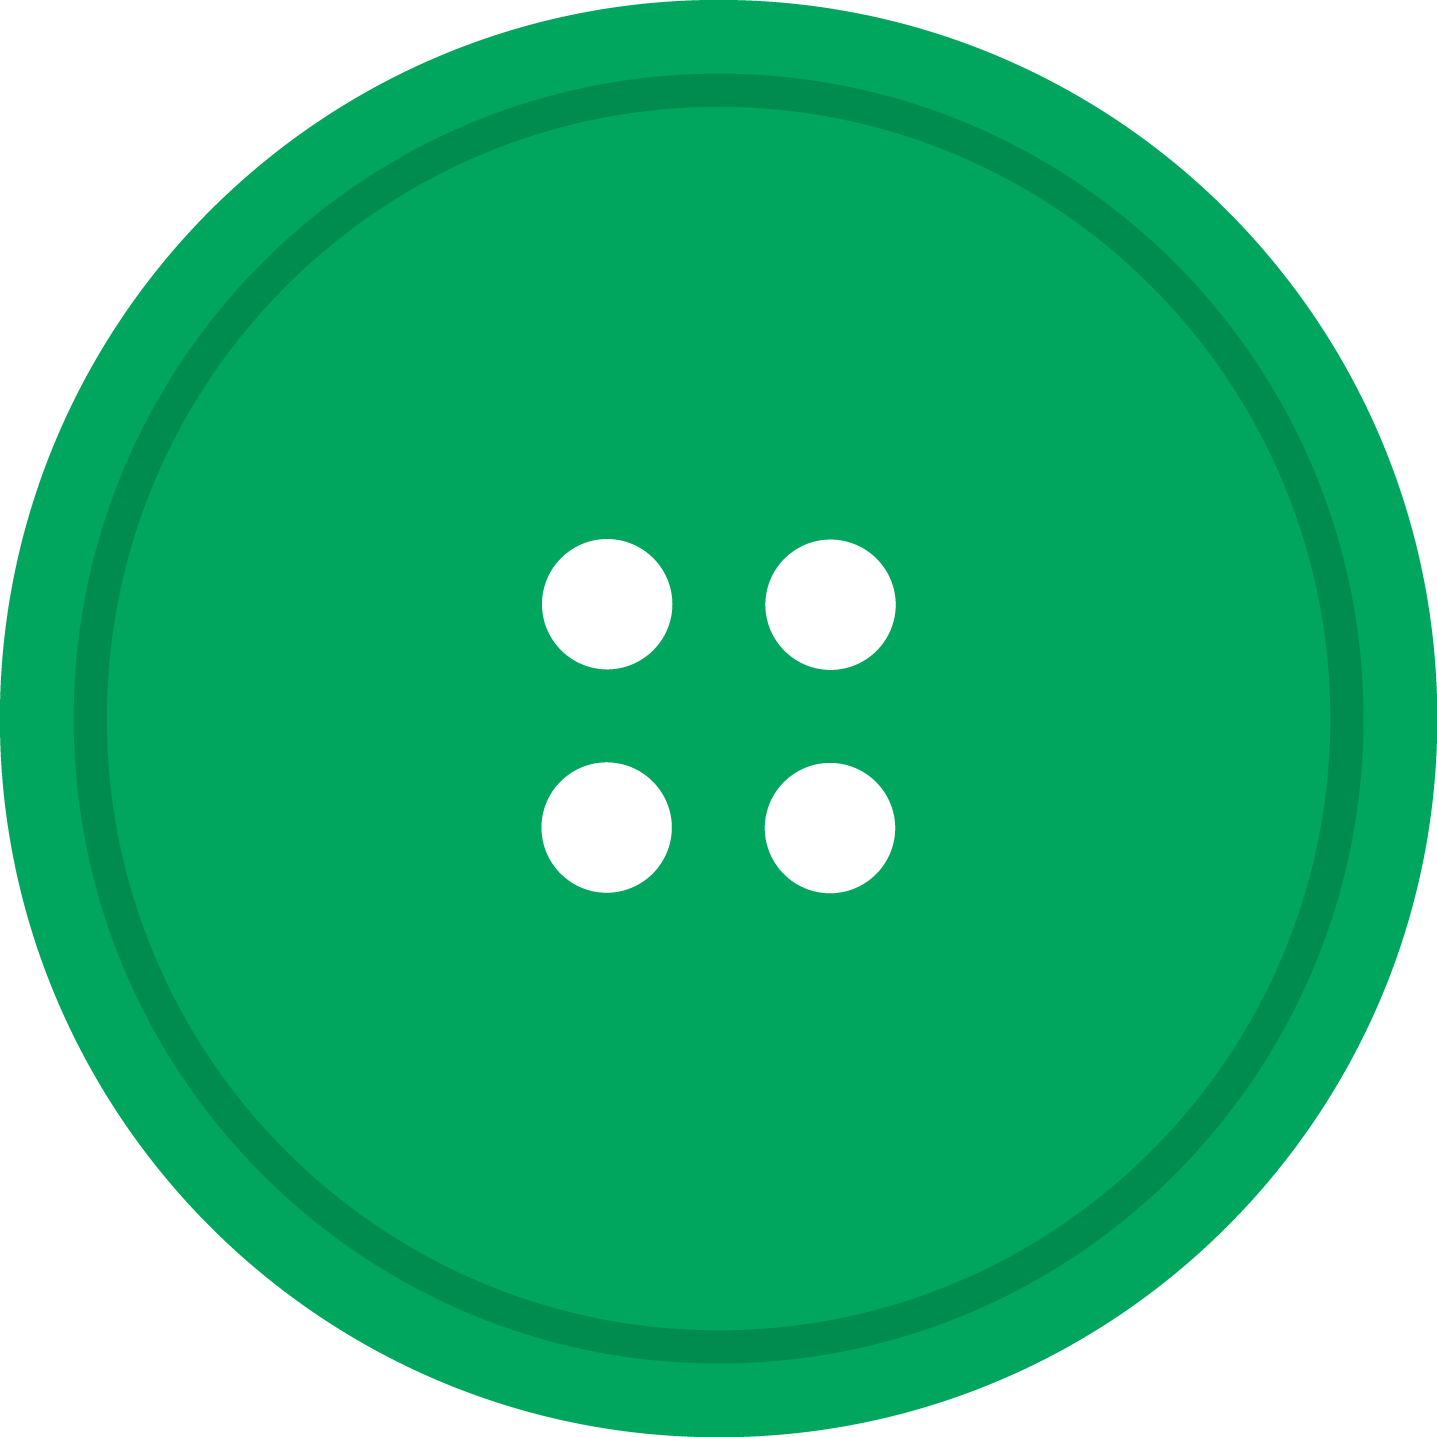 Greent Round Button PNG Image